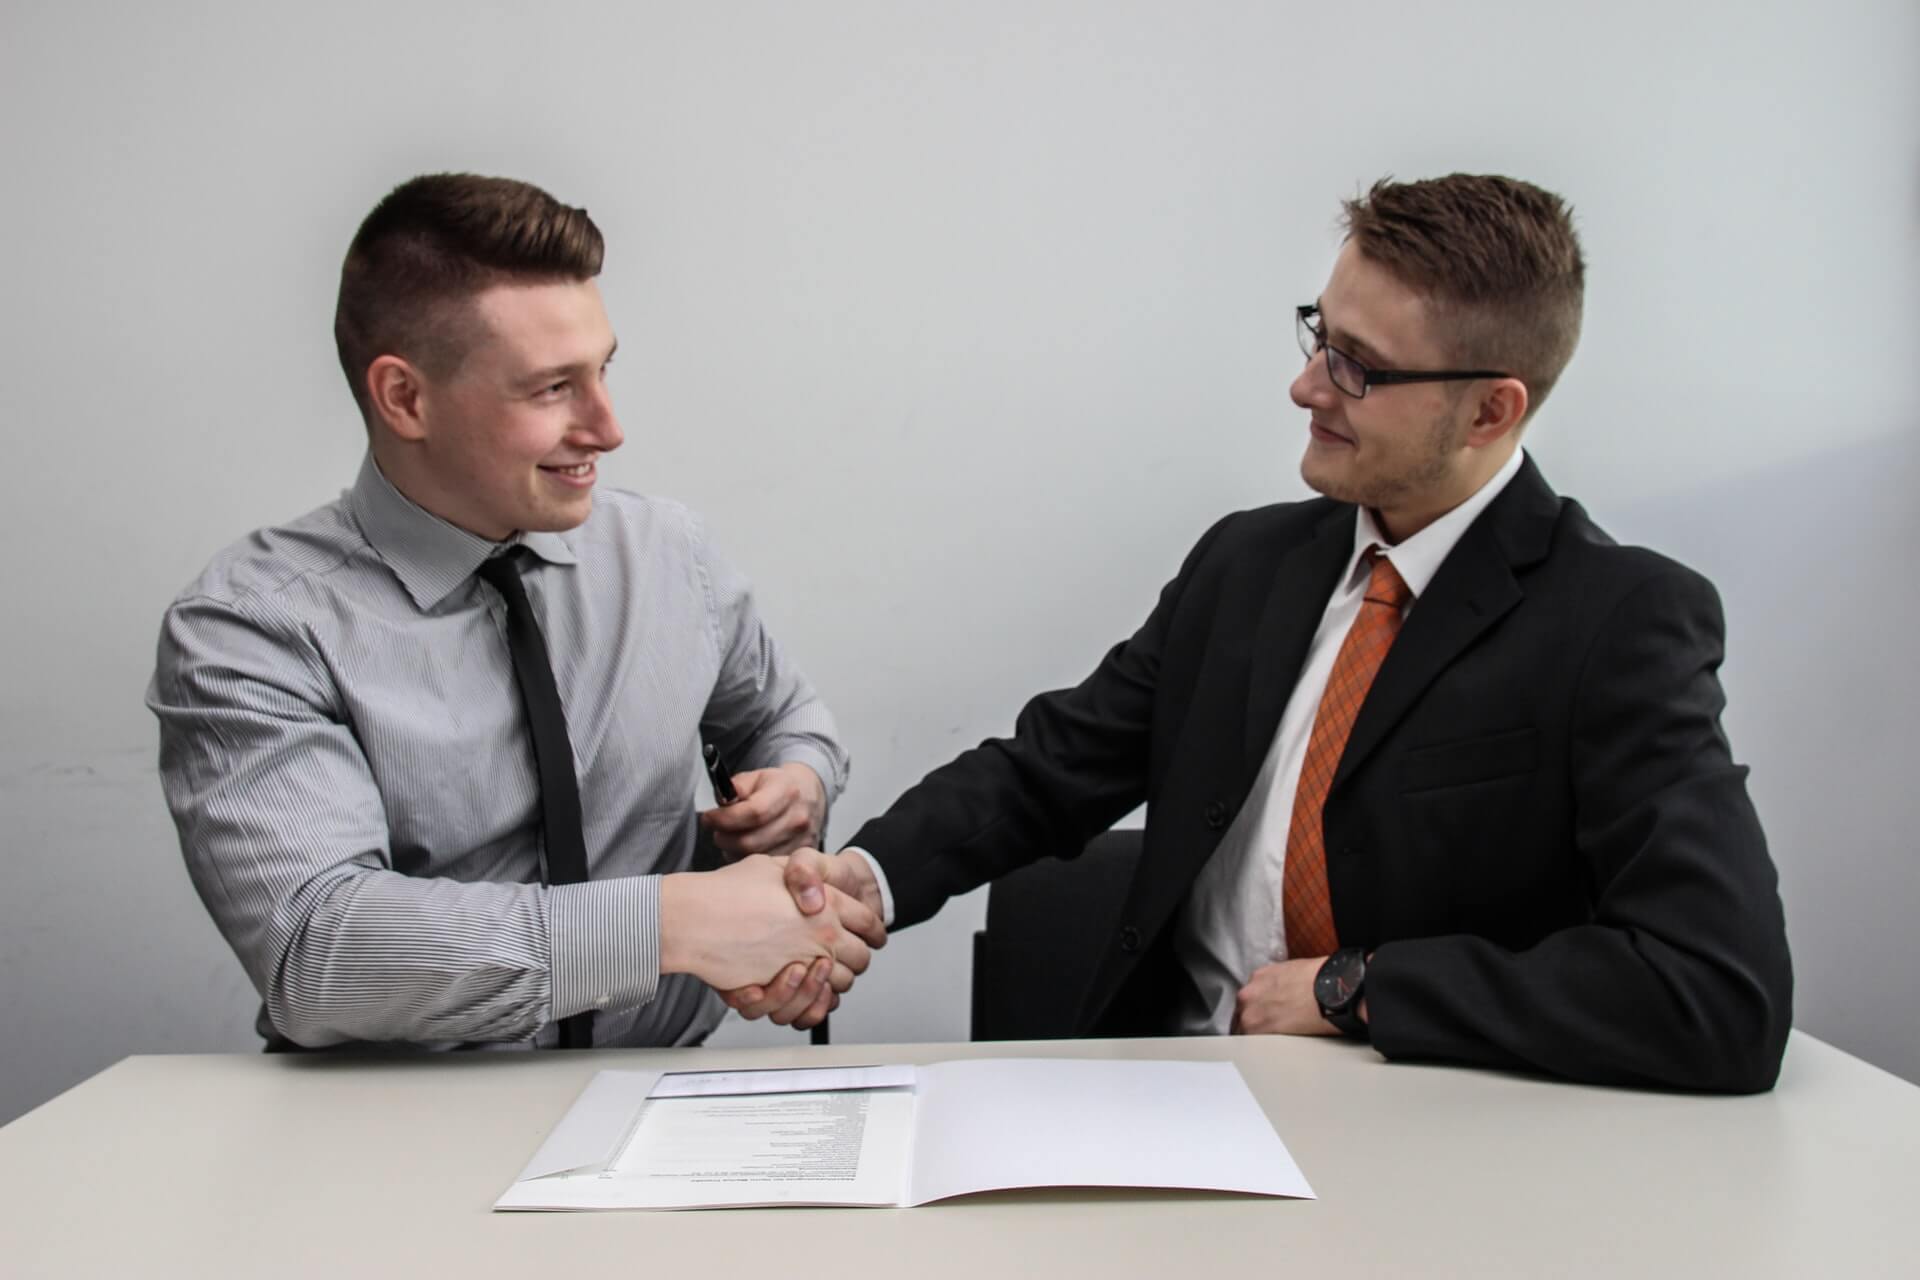 Businessman shaking hands with a client over contract papers